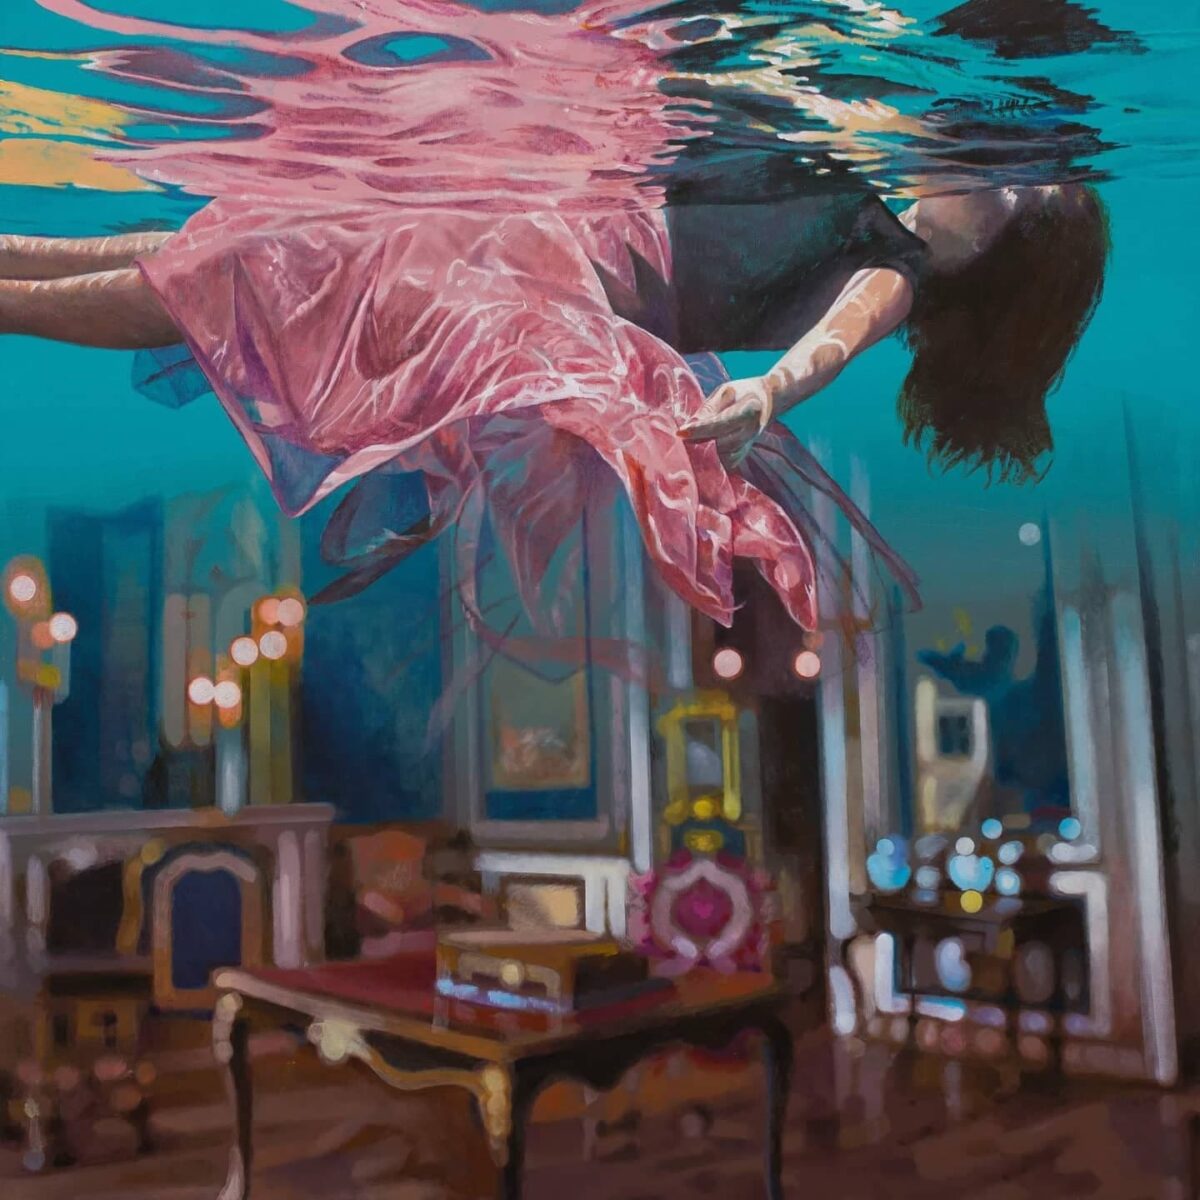 Dream Of Freedom Breathtaking Surrealistic Paintings Of Figures Floating In Flooded Rooms By Ivana Zivic 4